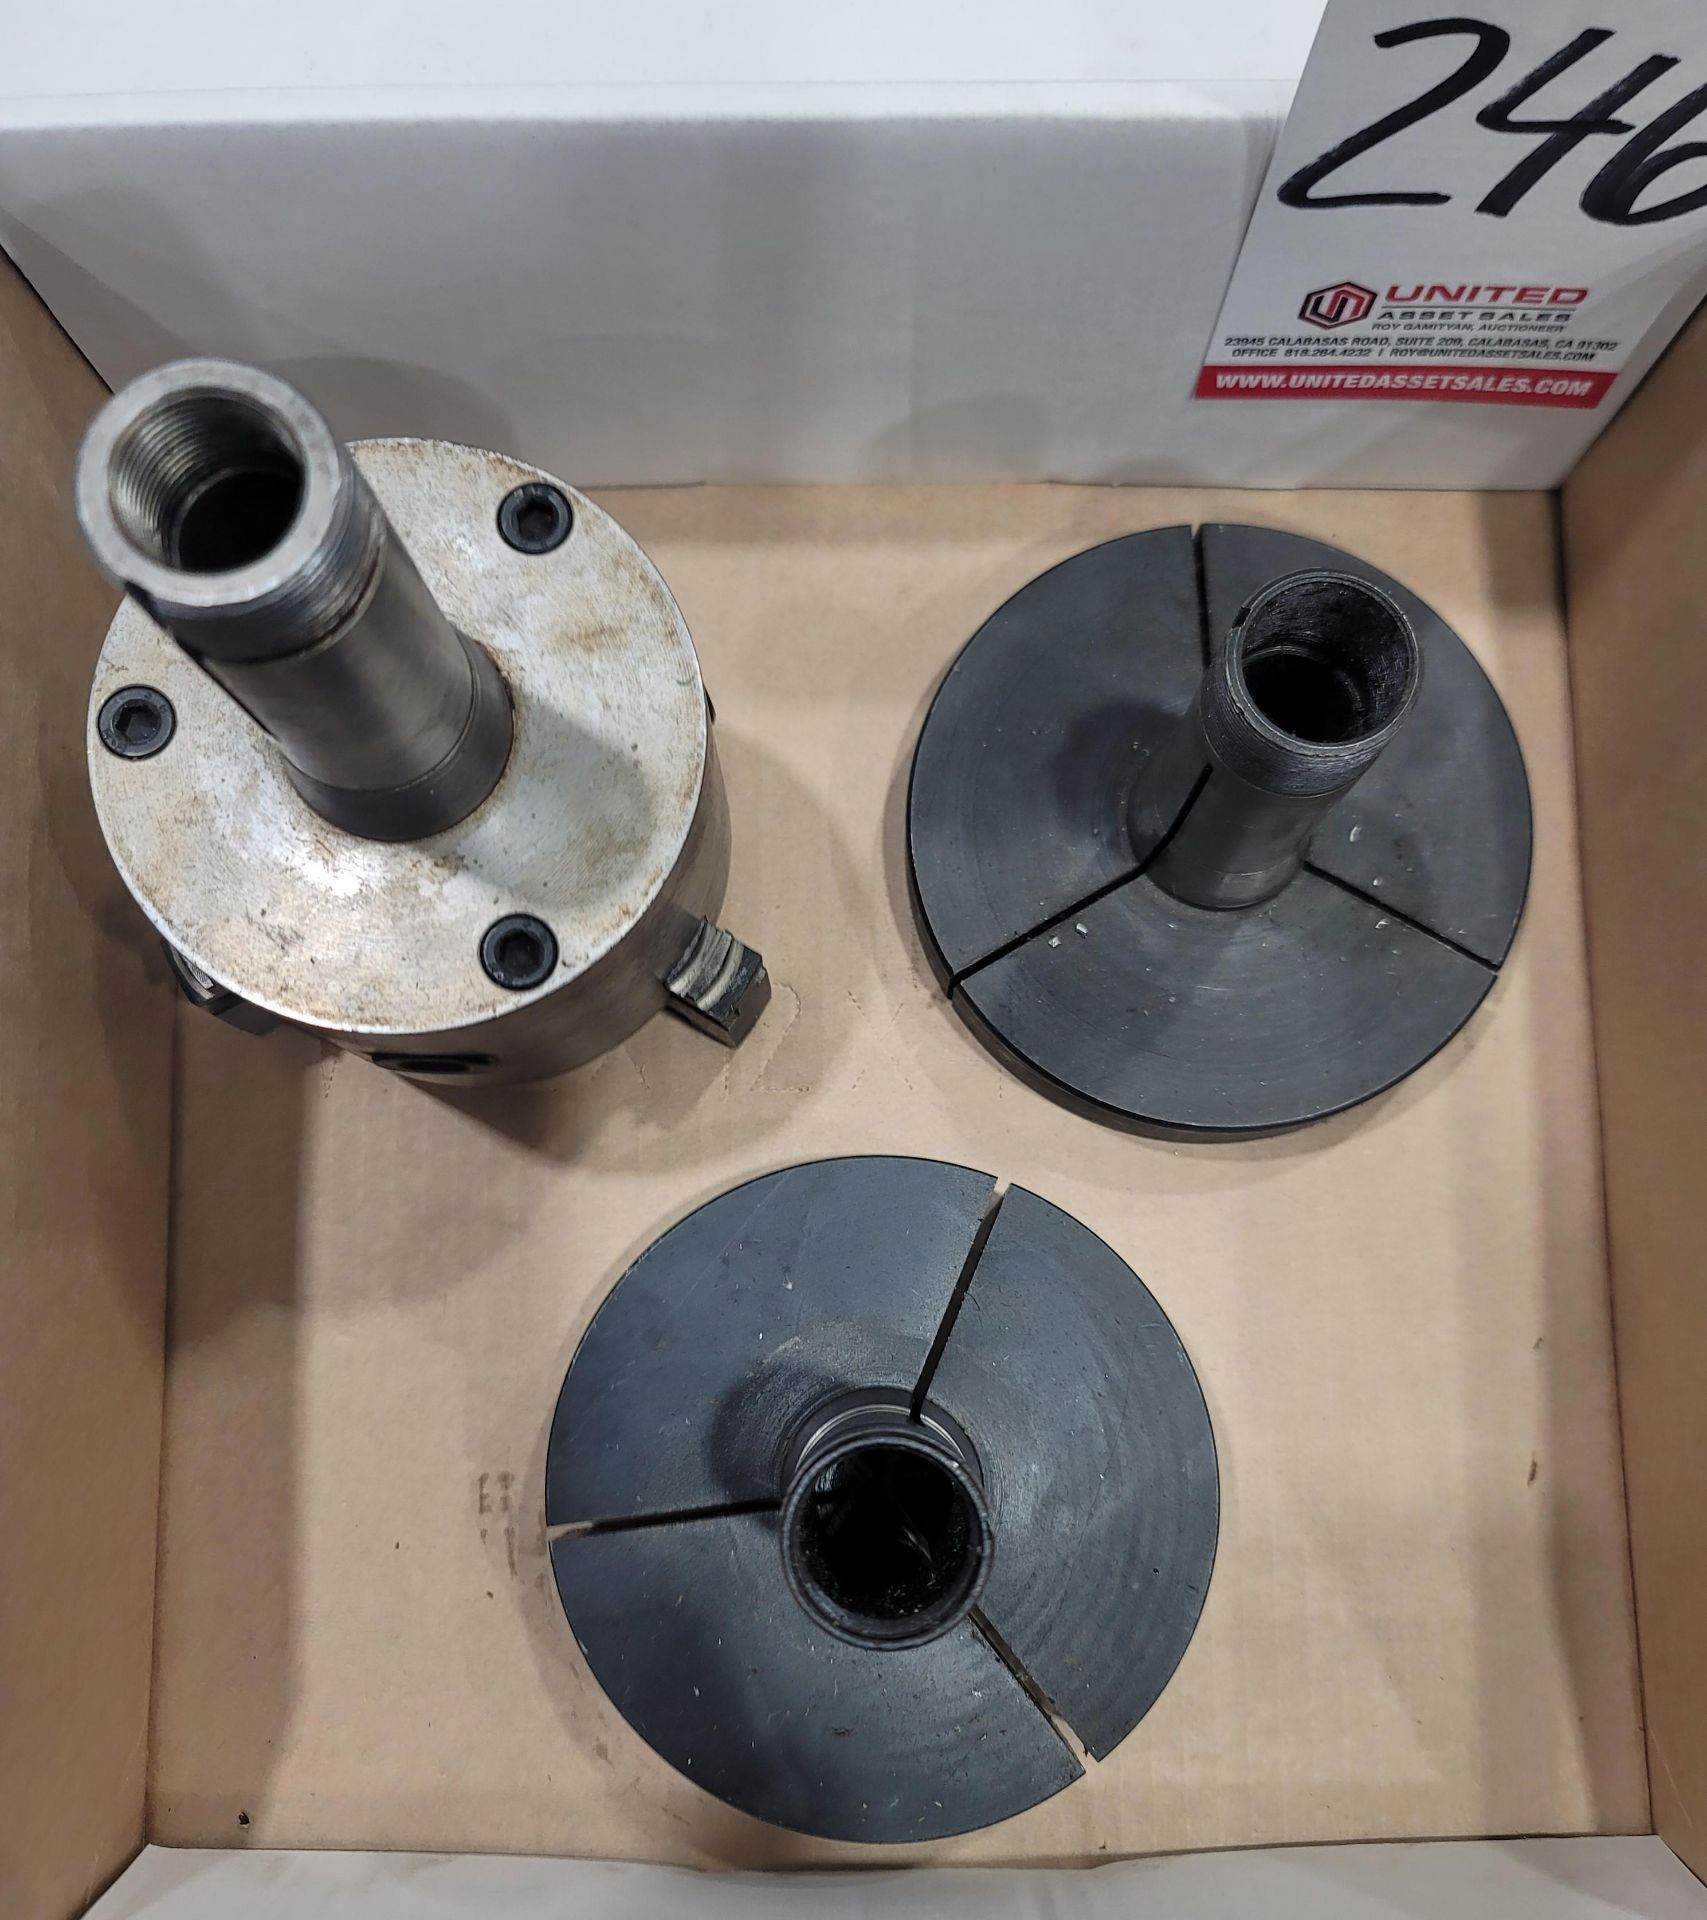 LOT - (1) 4" 3-JAW 5C COLLET CHUCK, (2) 5" 5C STEP COLLETS